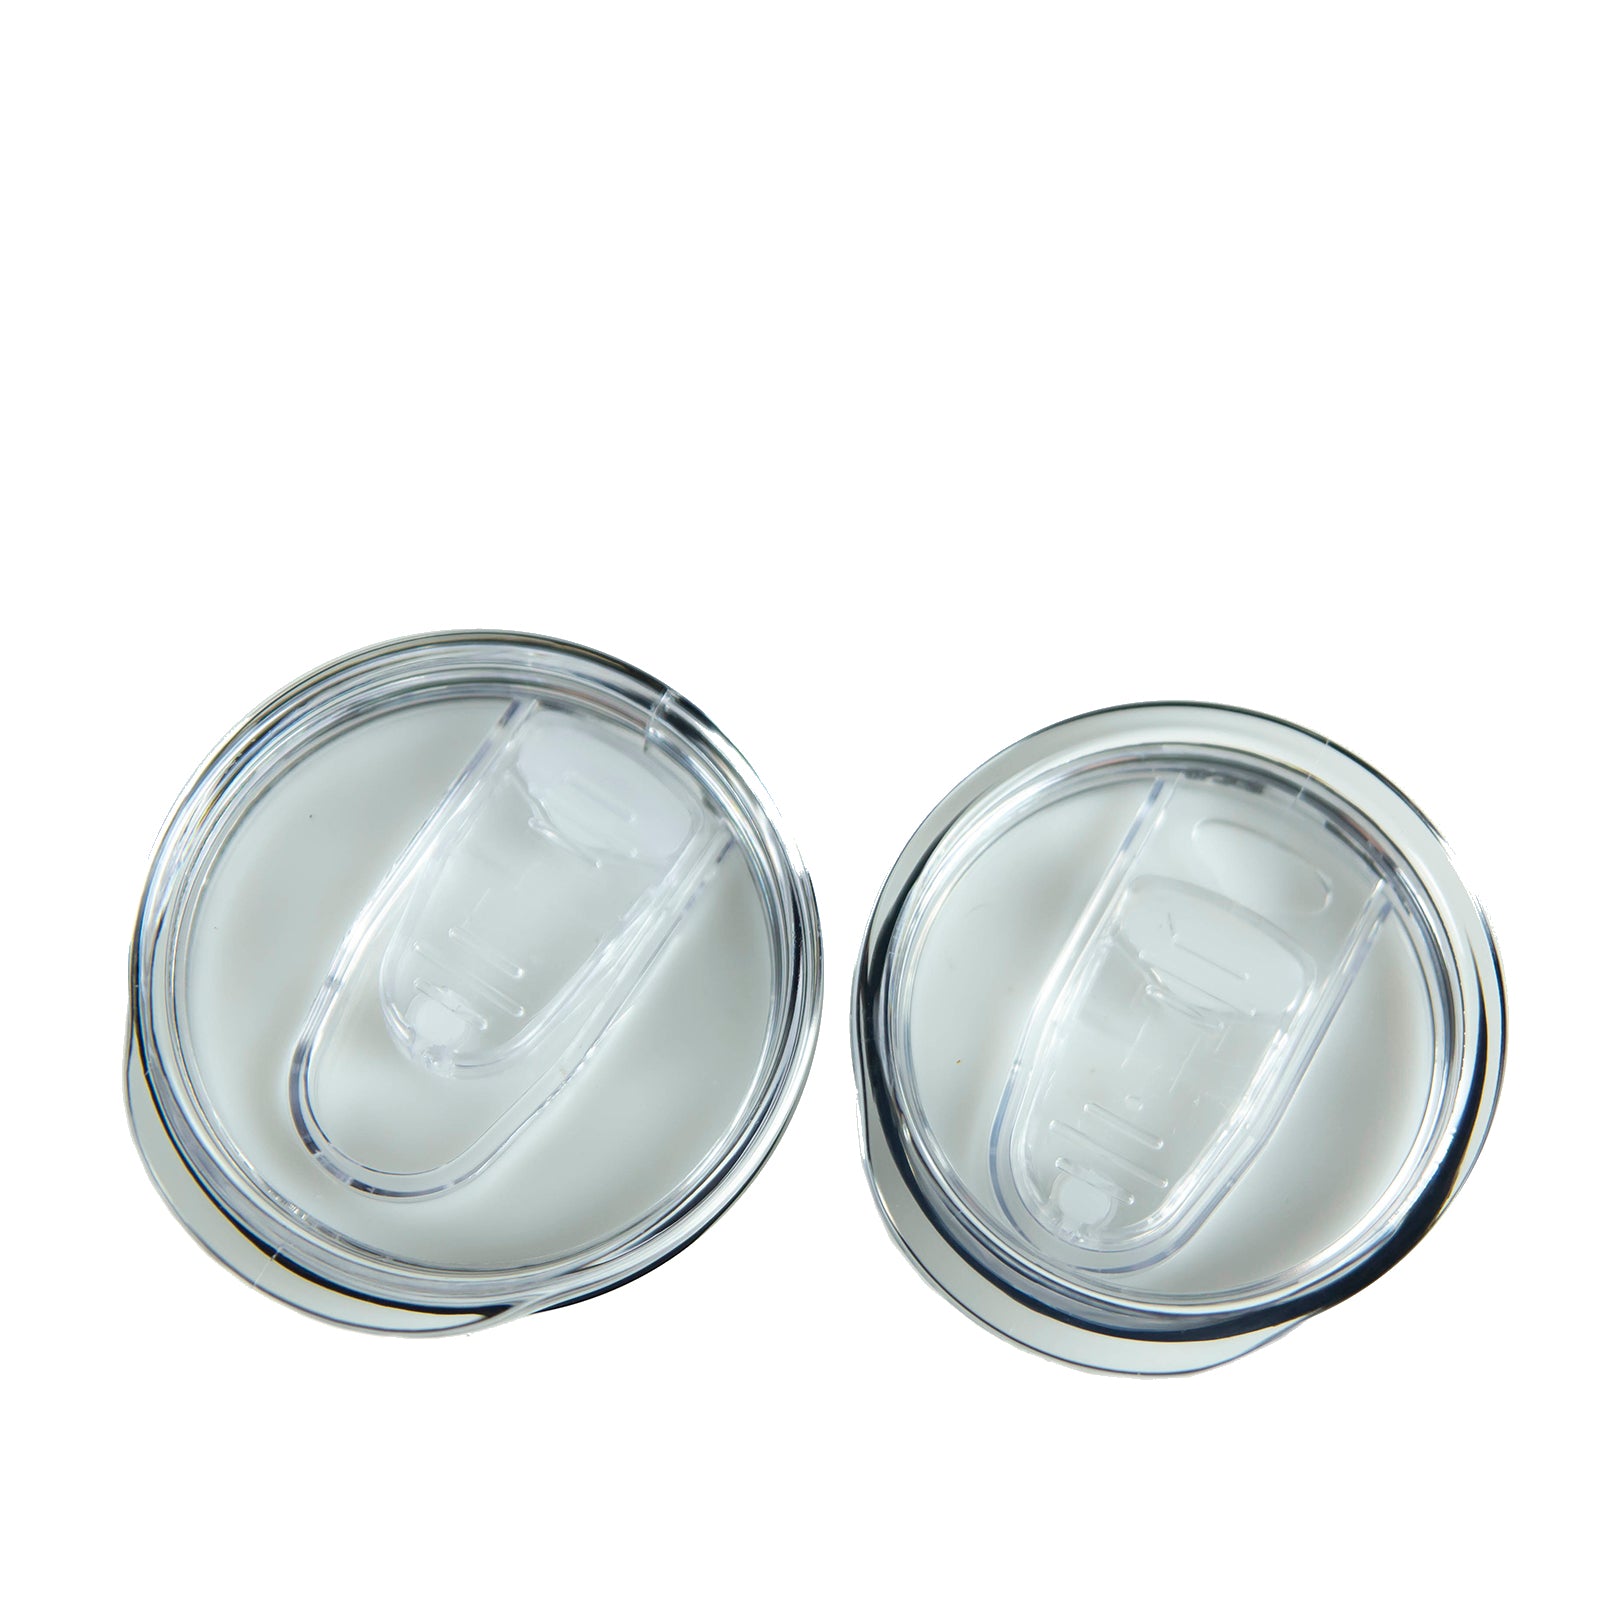 Tumbler Lid For, Replacement Lids For Stainless Steel Tumbler